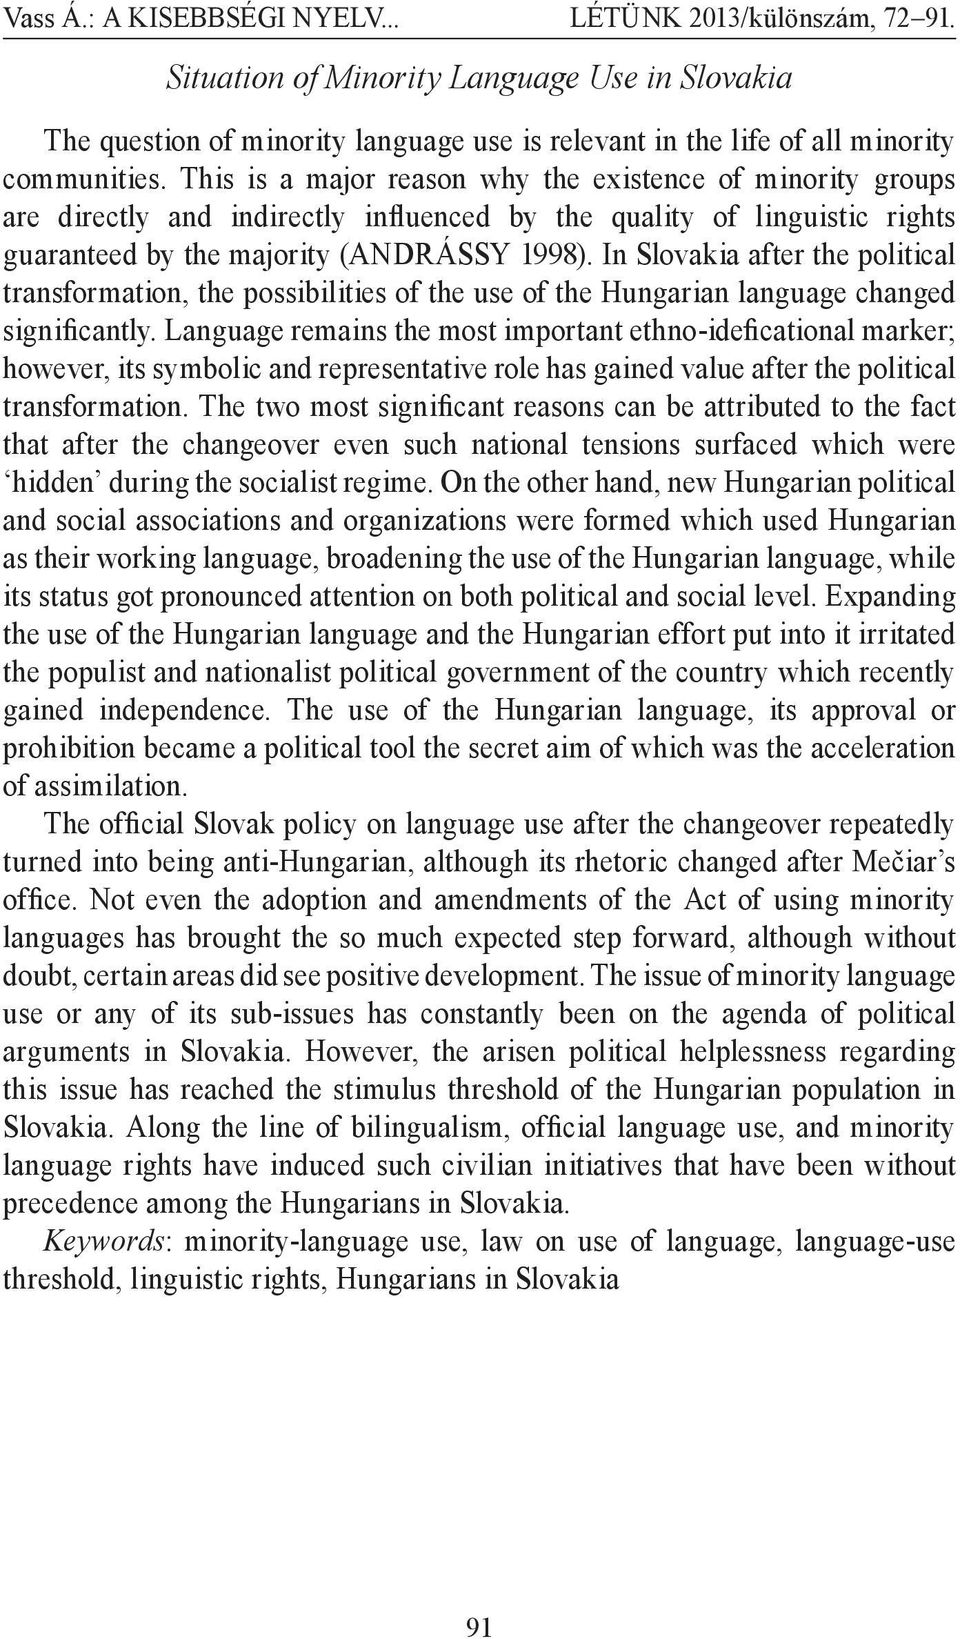 In Slovakia after the political transformation, the possibilities of the use of the Hungarian language changed significantly.